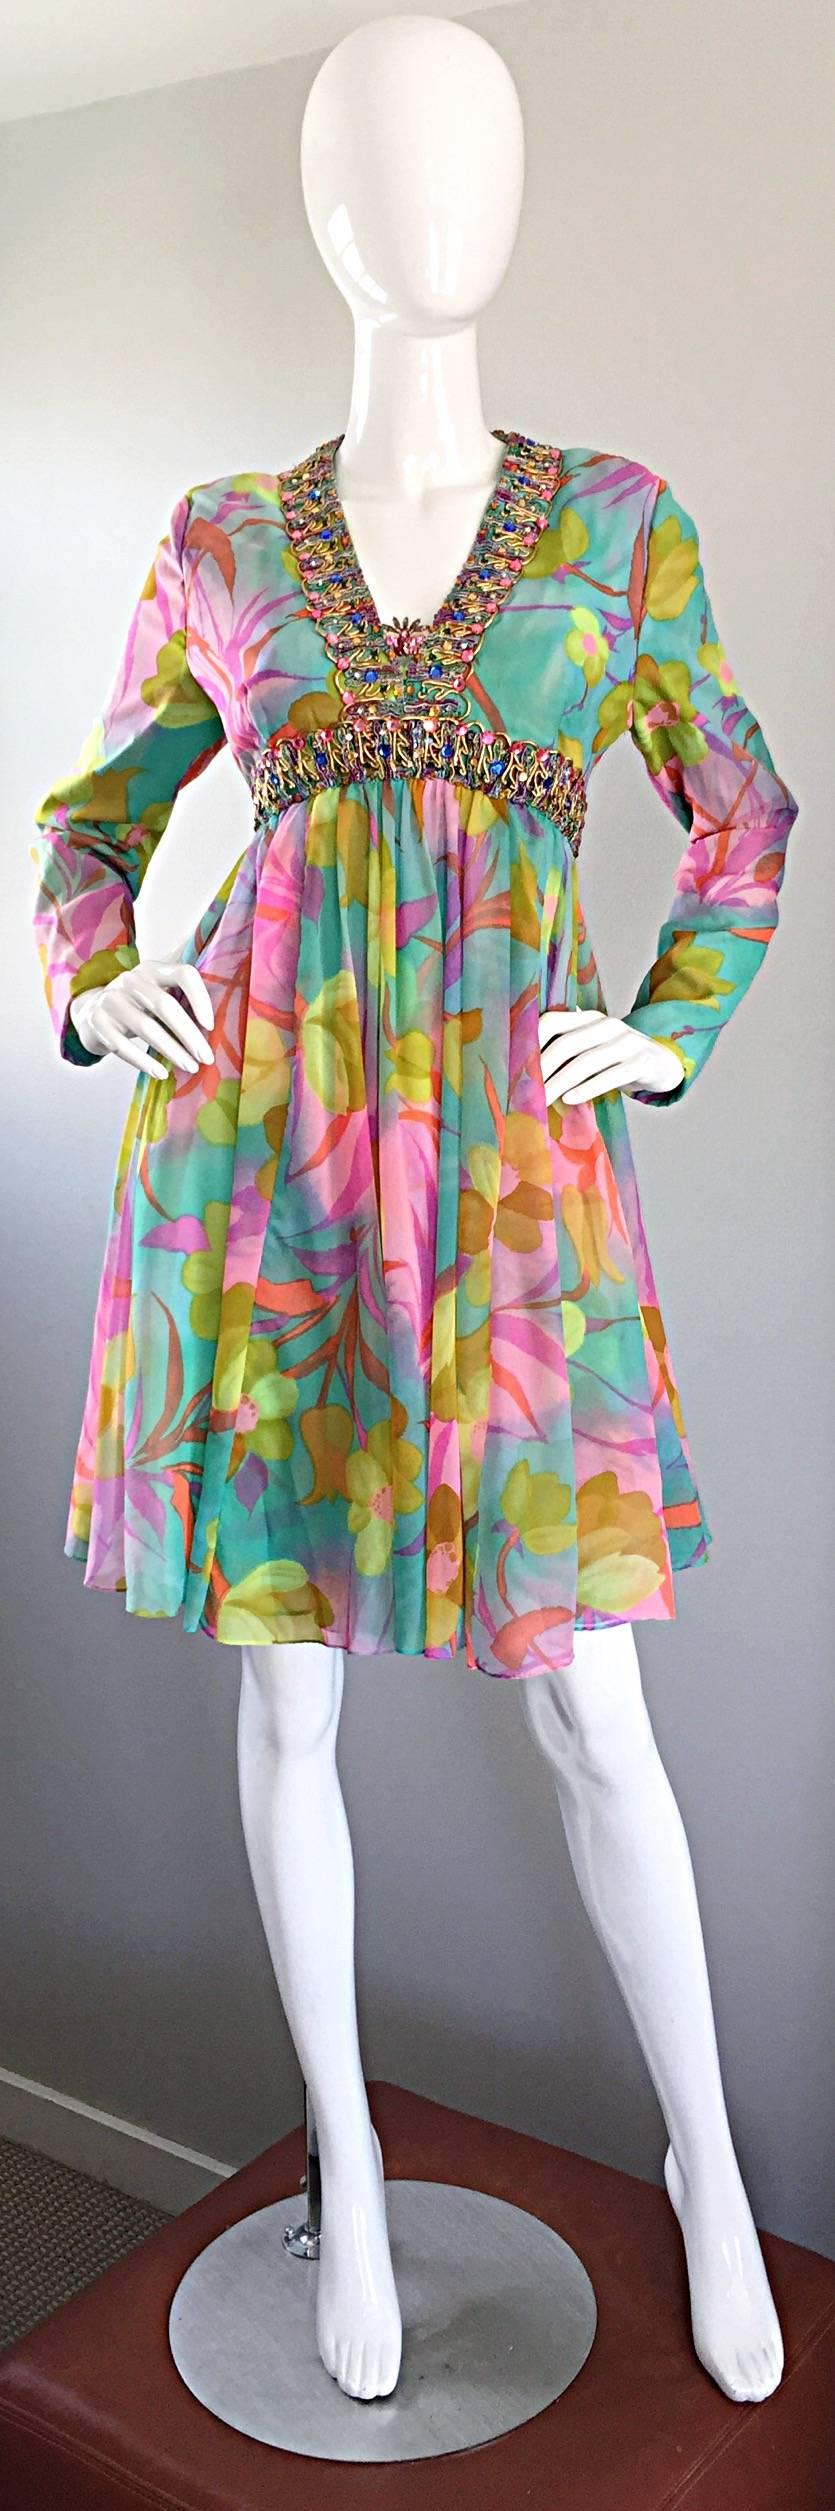 Spectacular vintage 60s I. MAGNIN long sleeve colorful silk chiffon empire waist dress! Features gorgeous flower prints in vibrant hues of pink, purple, blue, and green. Colorful crystal rhinestones encrusted at the bust and waistband. Full metal